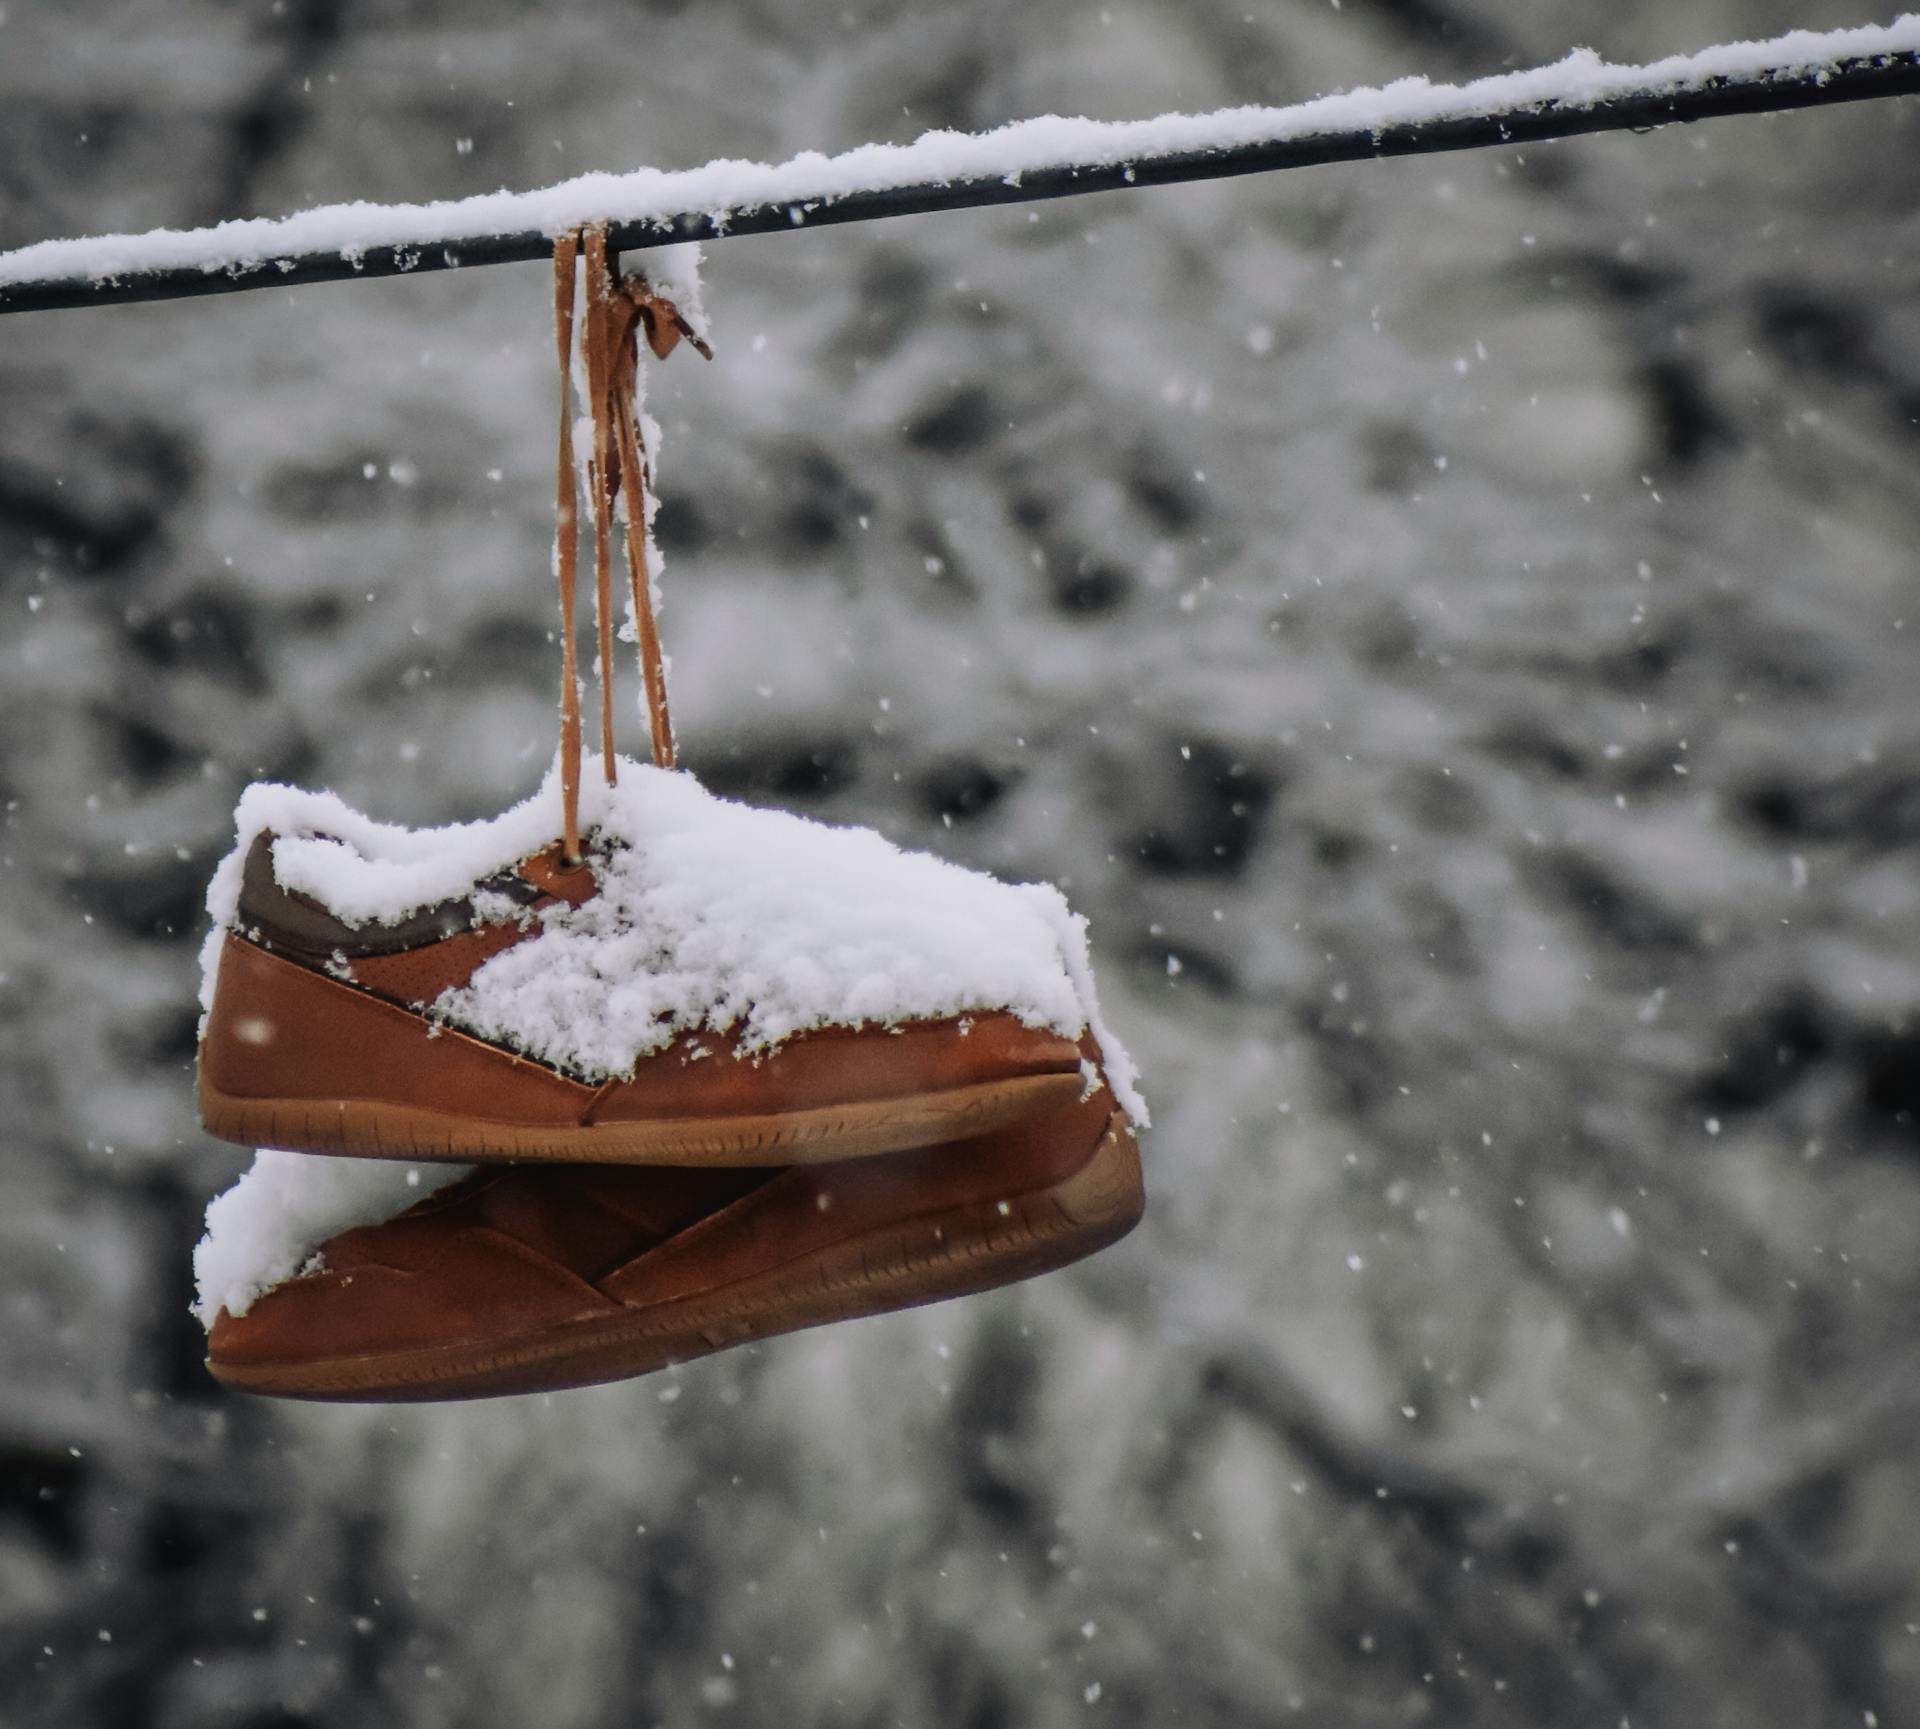 Brown old fashioned footwear covered with snow hanging on rope against leafless trees on blurred background on cold winter day